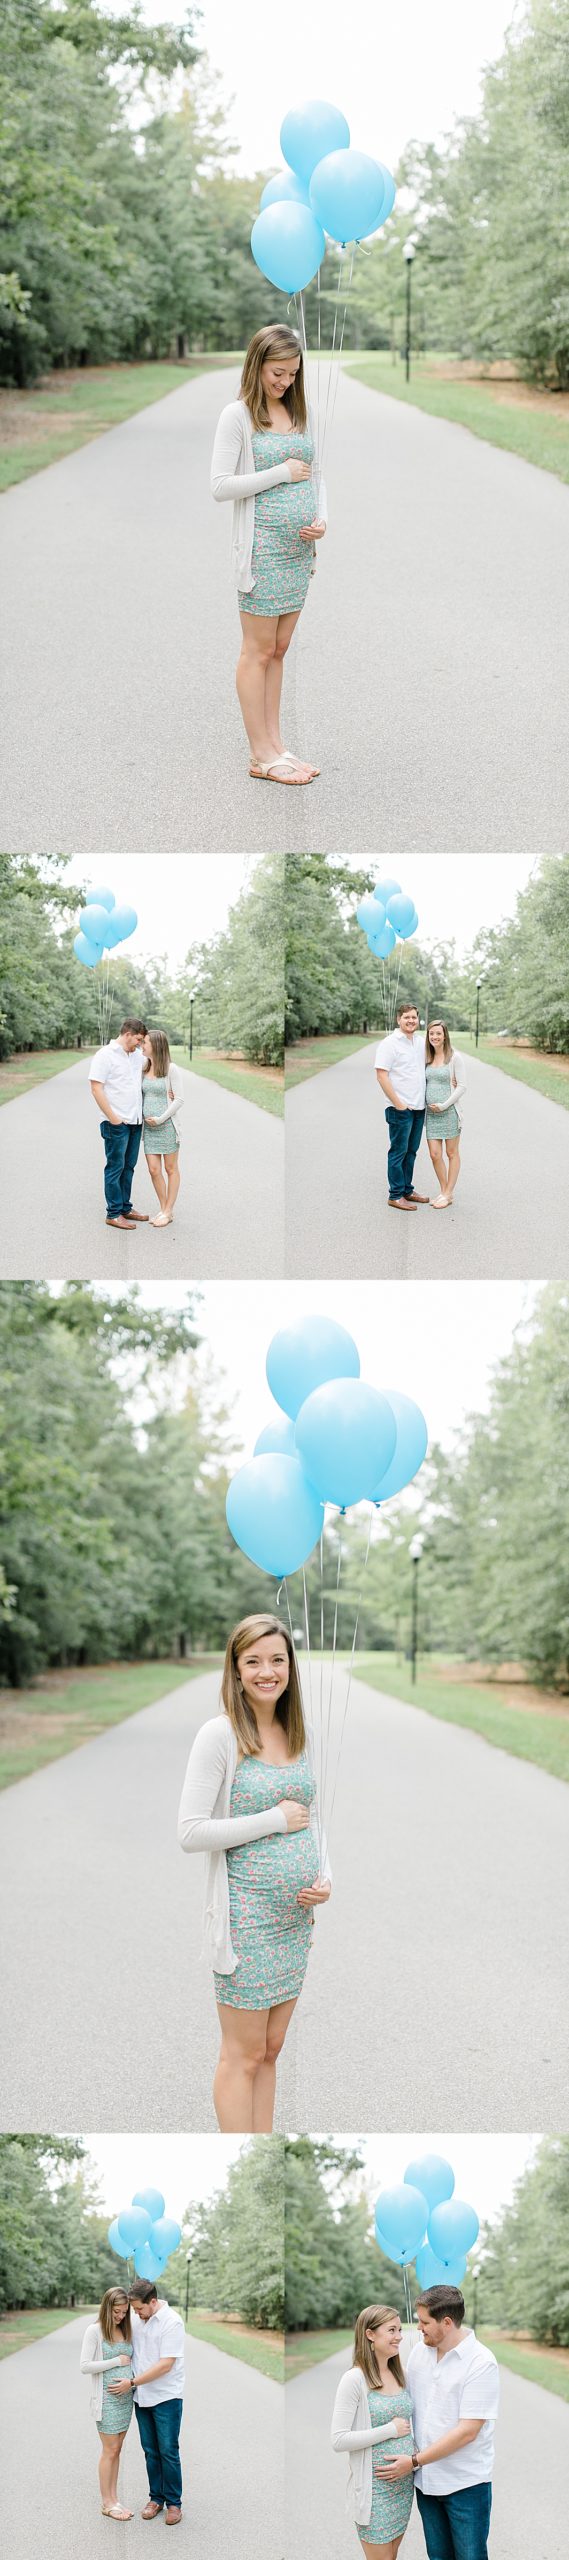 Baby Boy Announcement in Lexington South Carolina with Ashleigh Donahue Photography